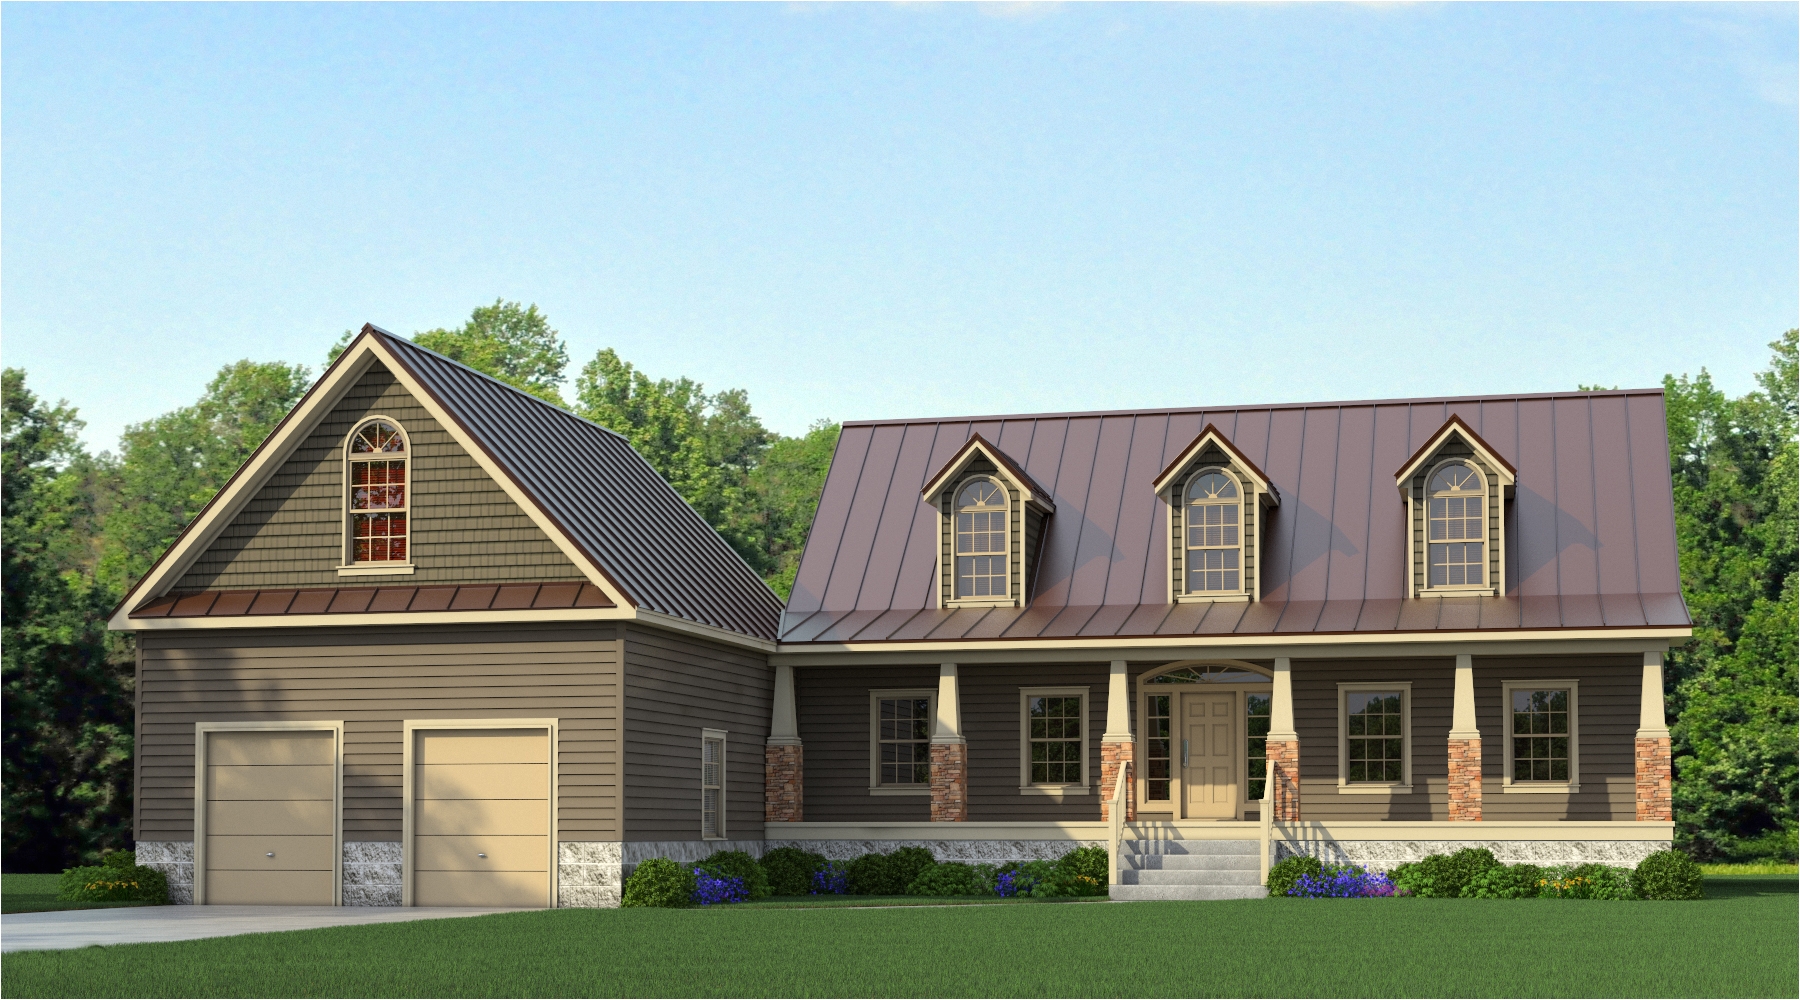 pole barn house plans and prices indiana morton building home plans bibserver